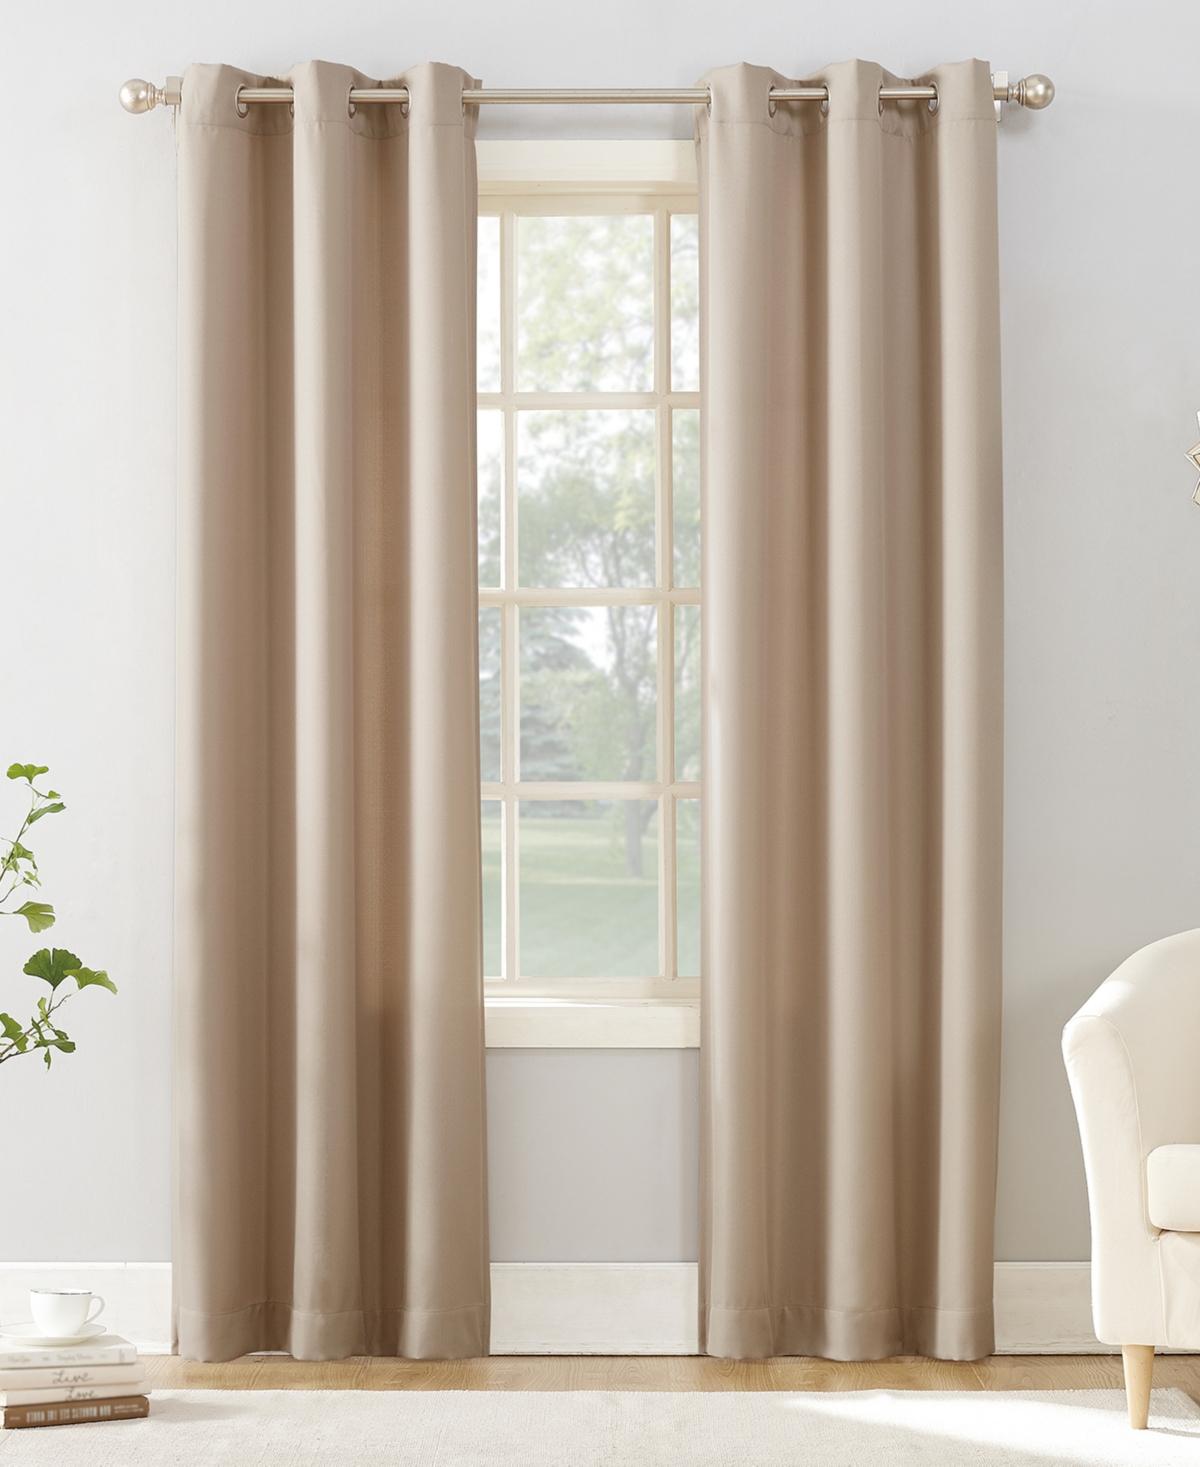 No. 918 Valerie Casual Textured Semi-sheer Grommet Curtain Panel, 40" X 63" In Oatmeal